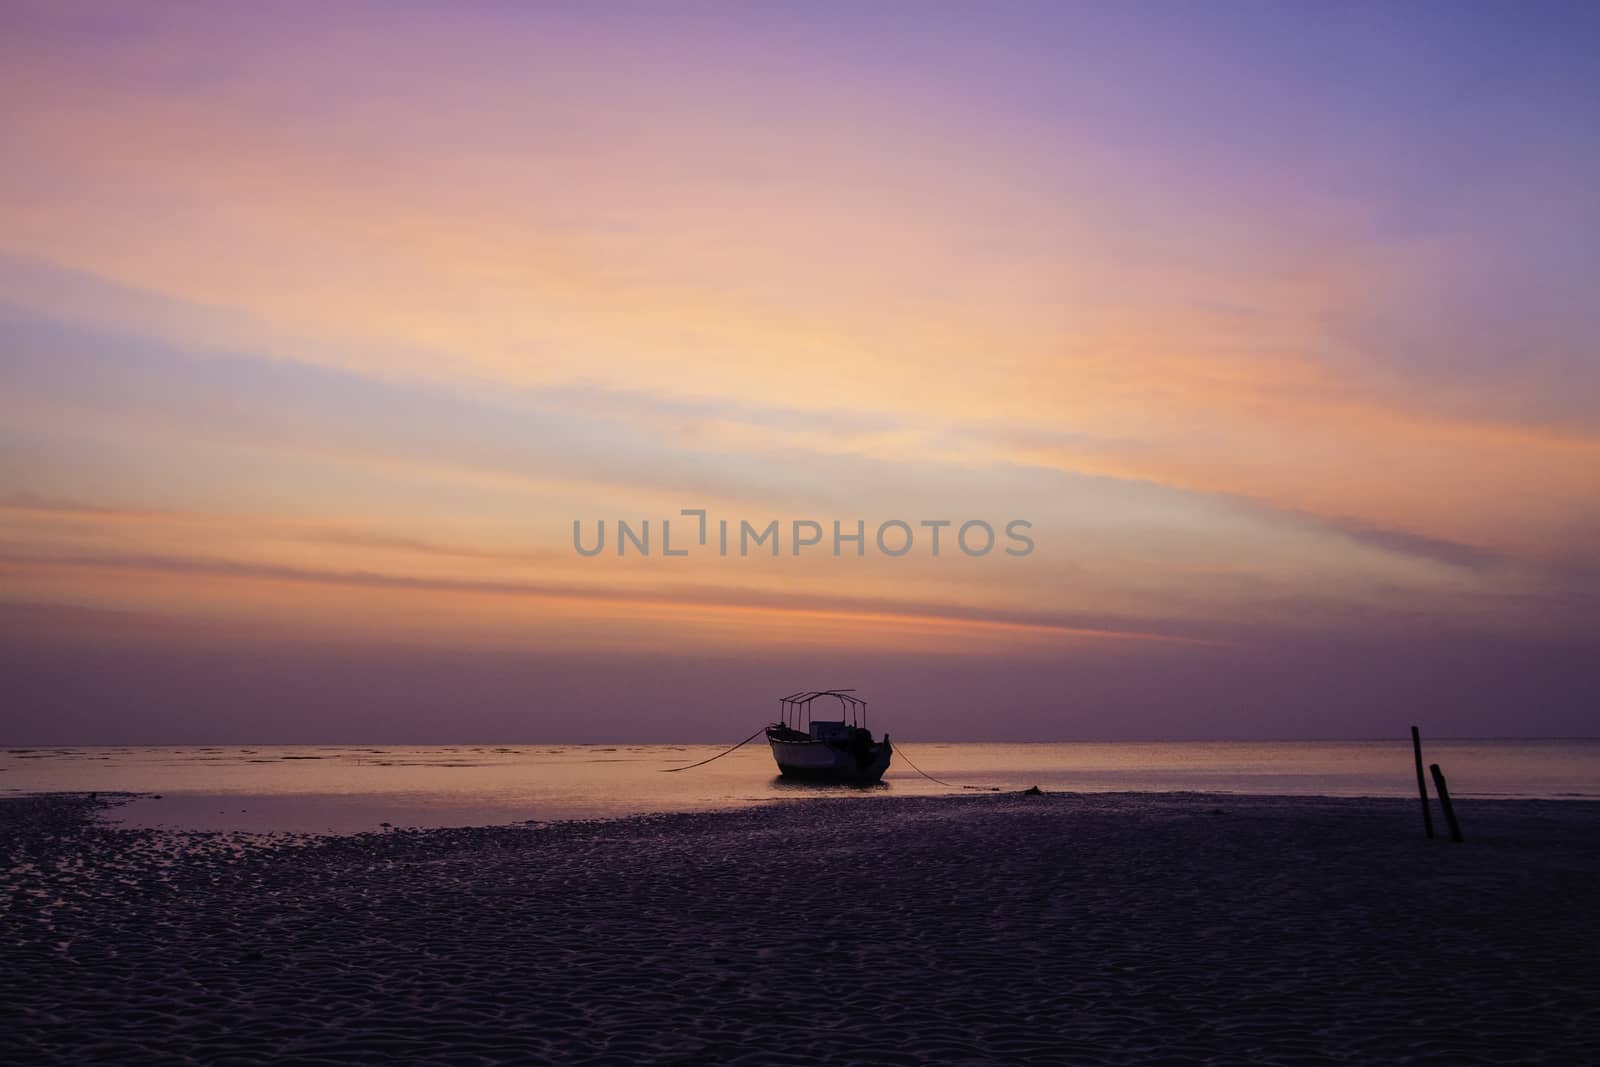 The low tide of predawn and dead calm sea has immobilised this lone motor boat anchored near shoreline while the approaching dawn is reflected by the various hues of blue and orange in the sky. the sandy beach in foreground and the two stakes on right stabilize the composition.